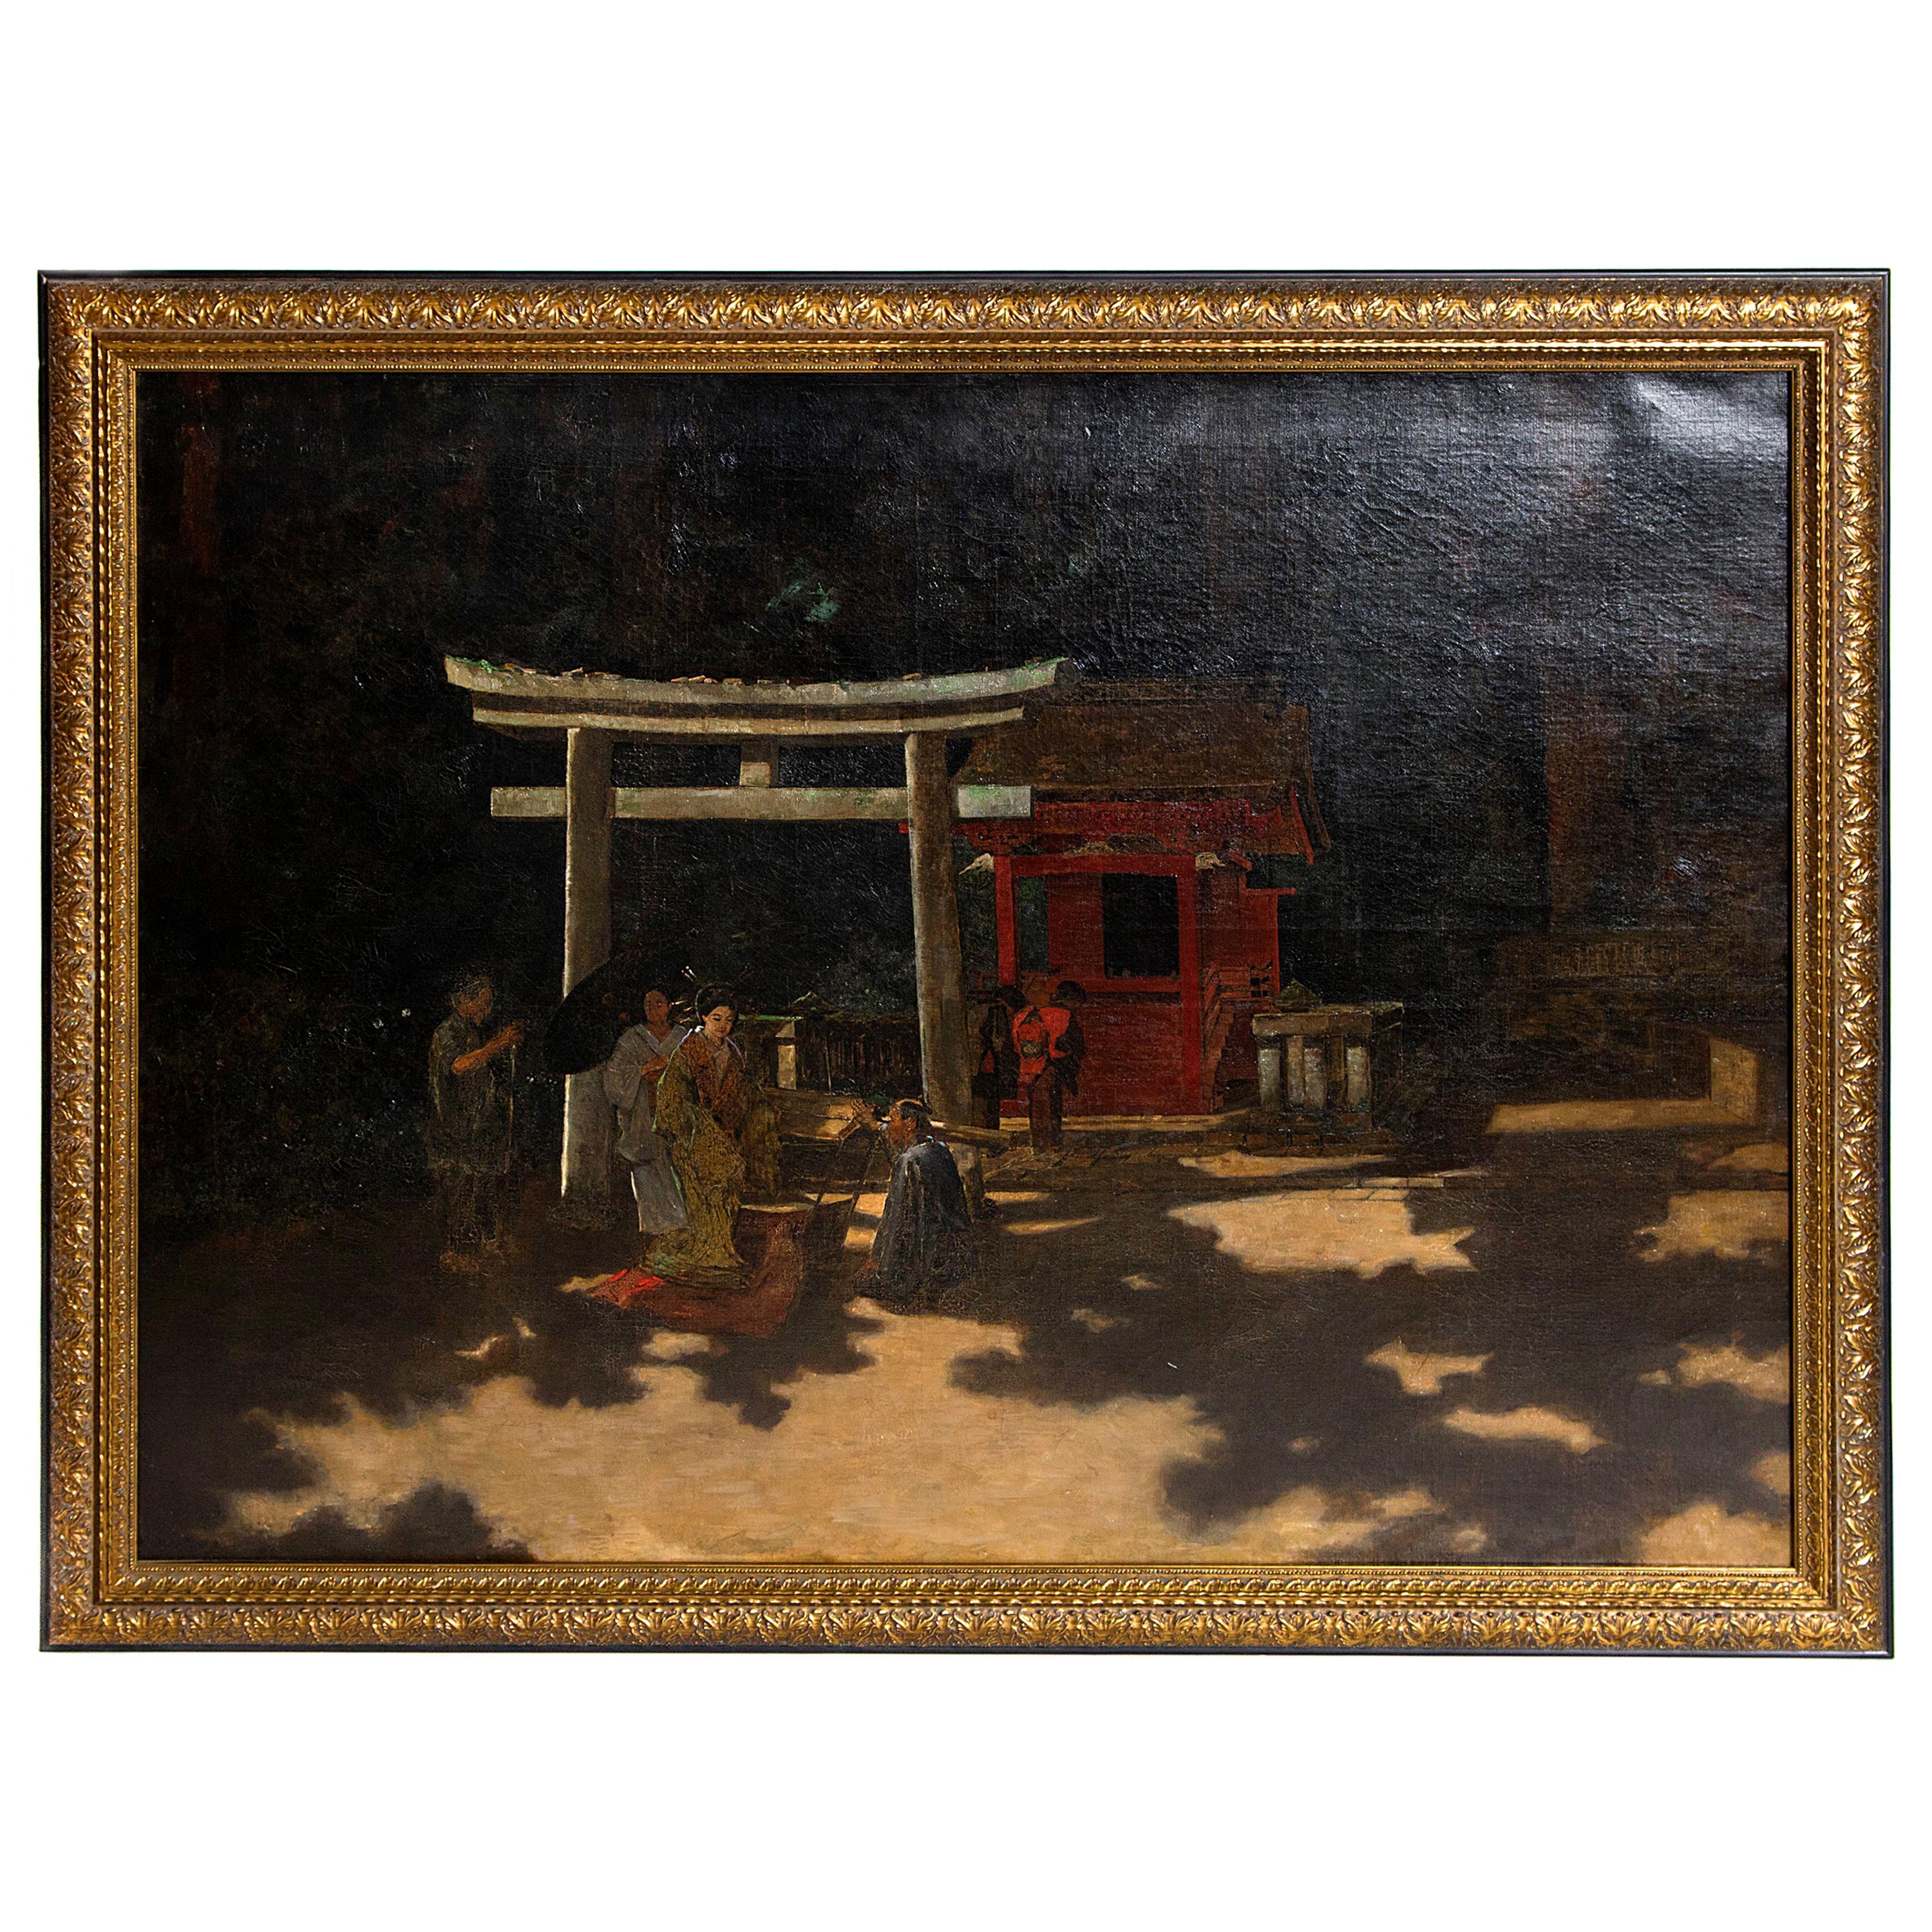 19th Century Oil on Canvas by Francis Heydhart,  "A Courtyard Ceremony, Nikko"